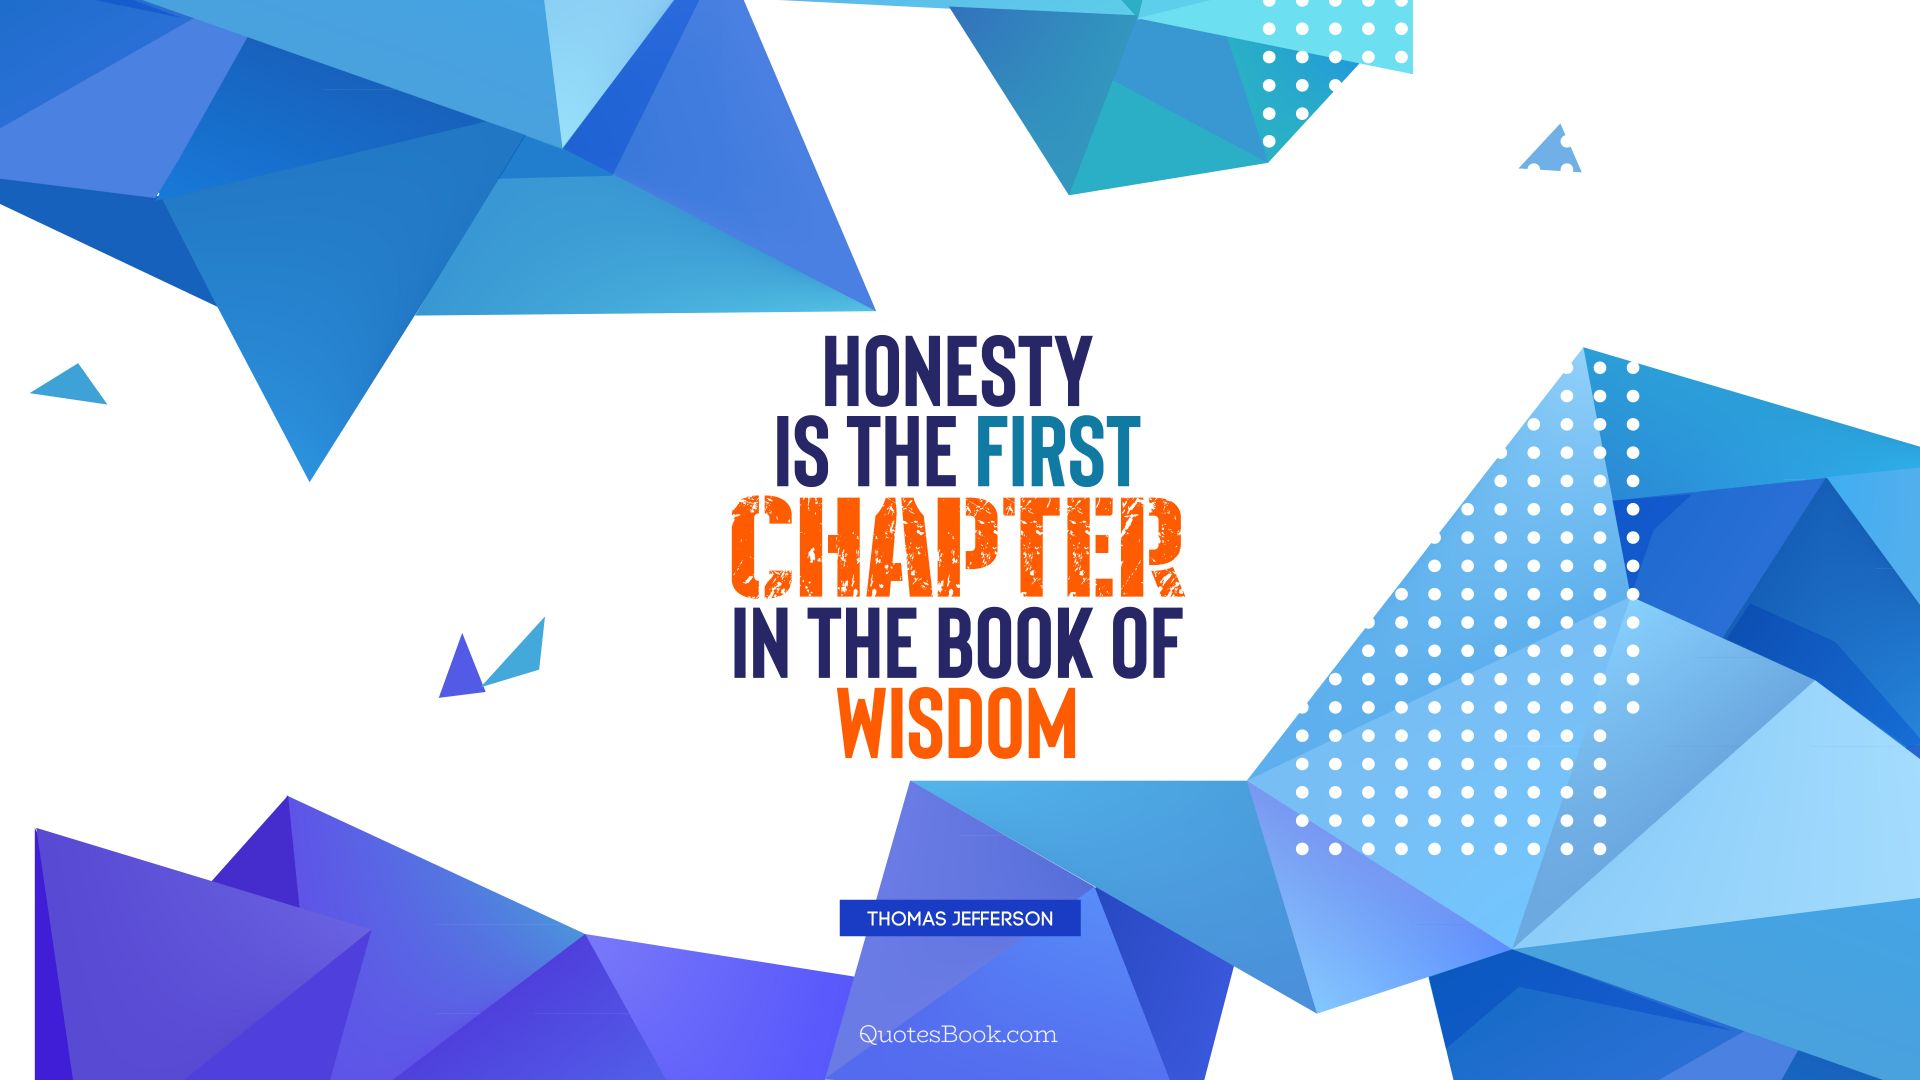 Honesty is the first chapter in the book of wisdom. - Quote by Thomas Jefferson 